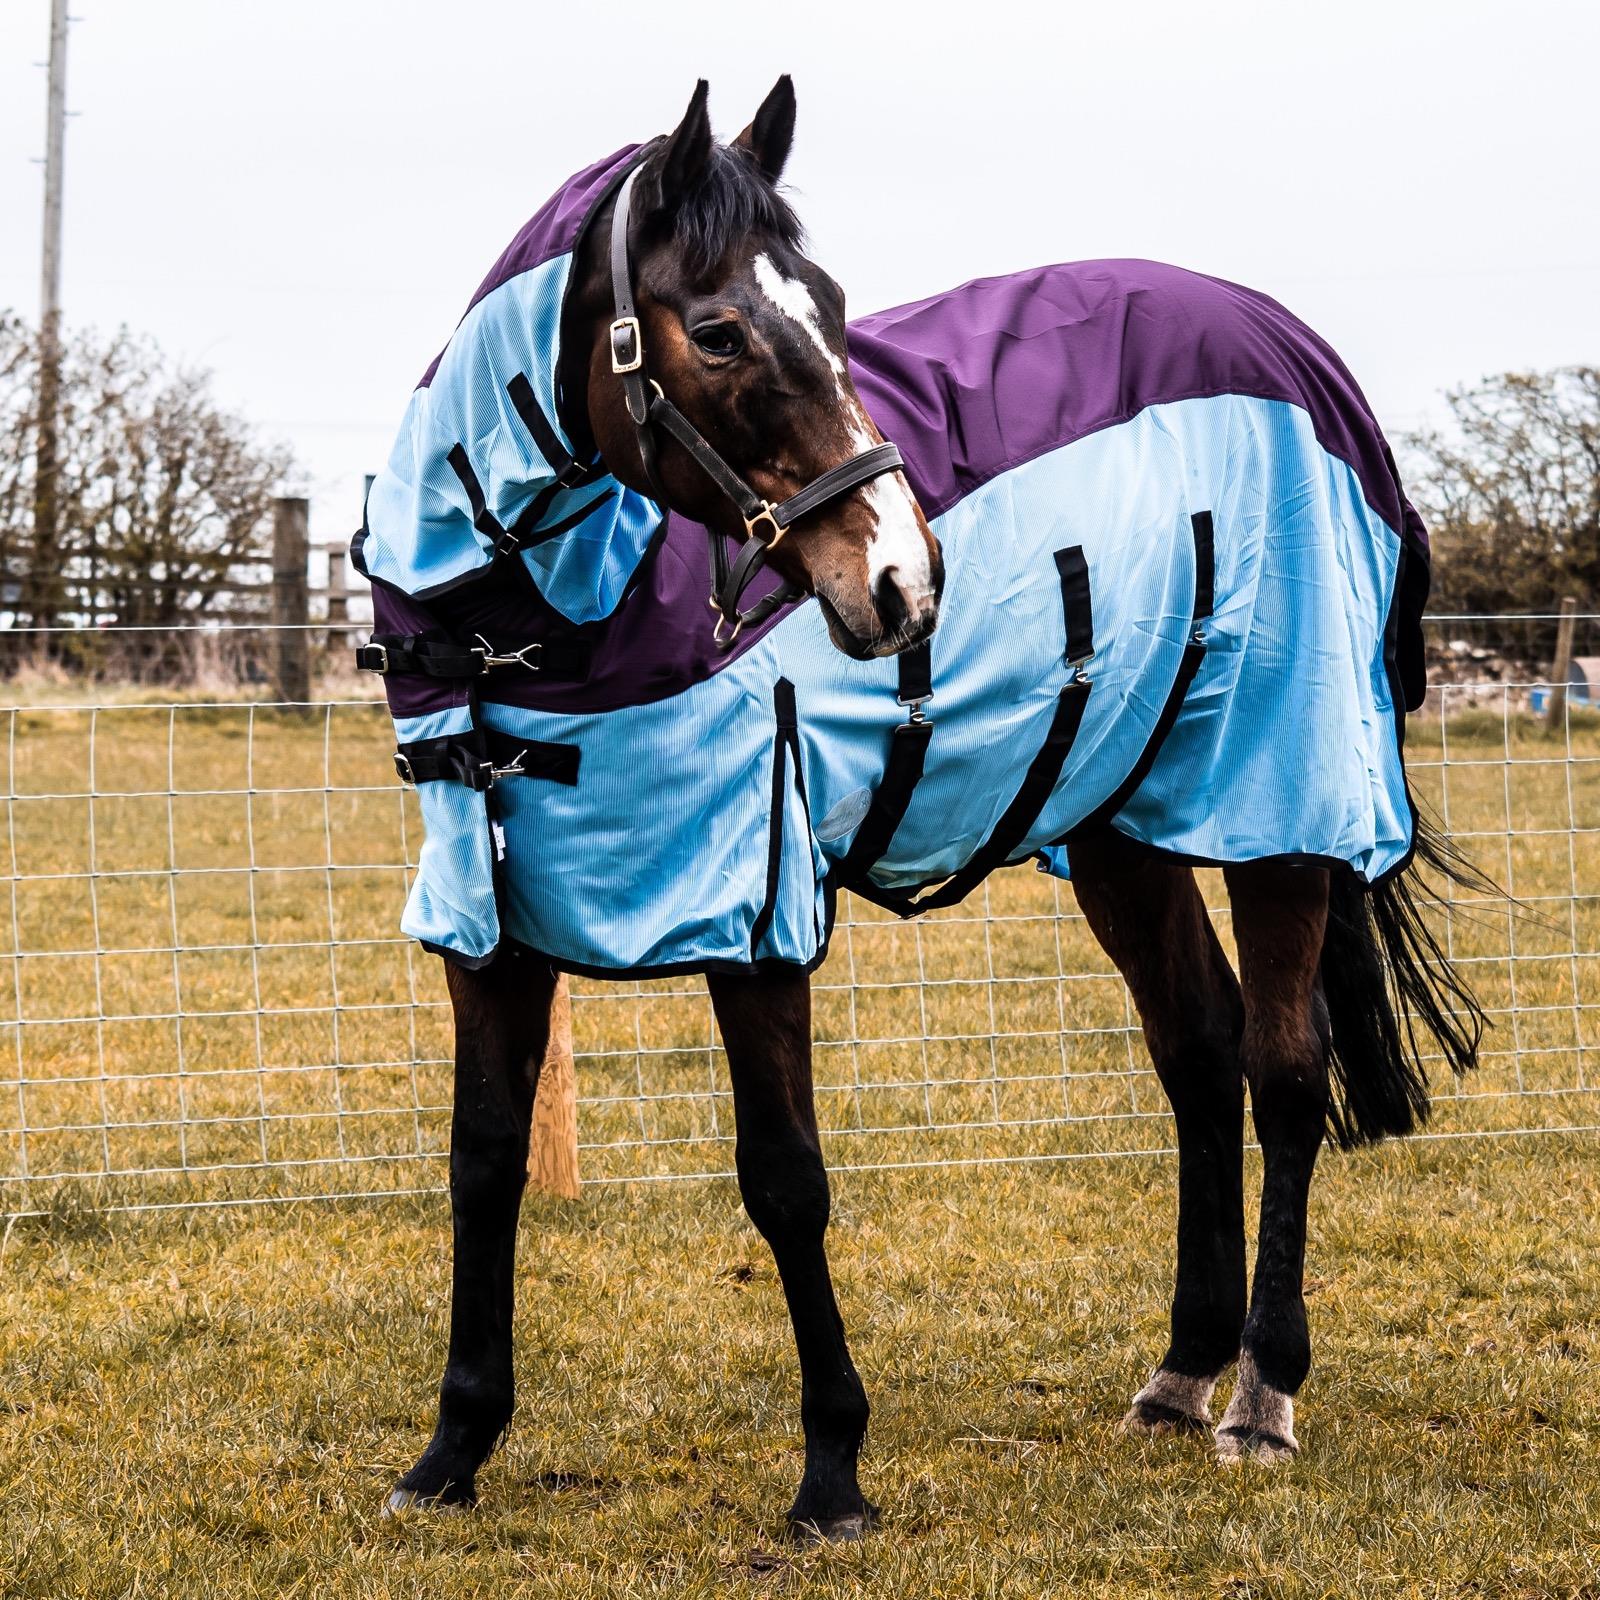 Are There Any Health Benefits to Using a Fly Rug on My Horse?